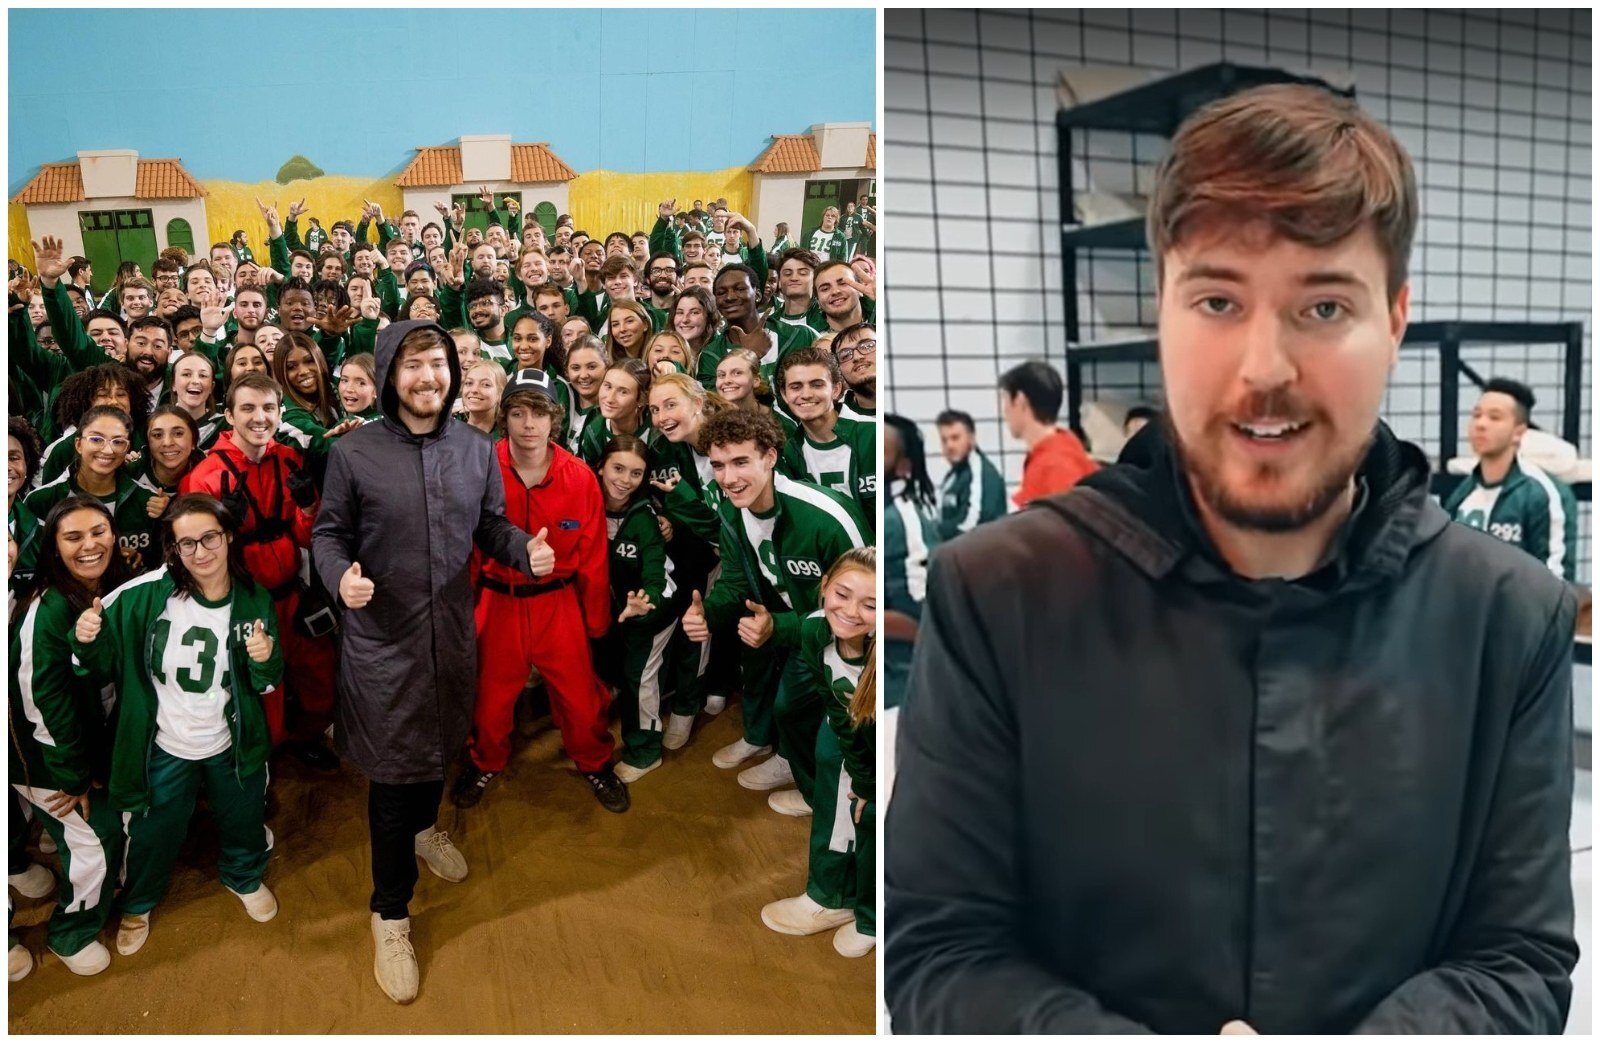 YouTube star MrBeast’s recreation of Squid Game was a viral hit. Photos: @mrbeast/Instagram, MrBeast/Captured from Youtube